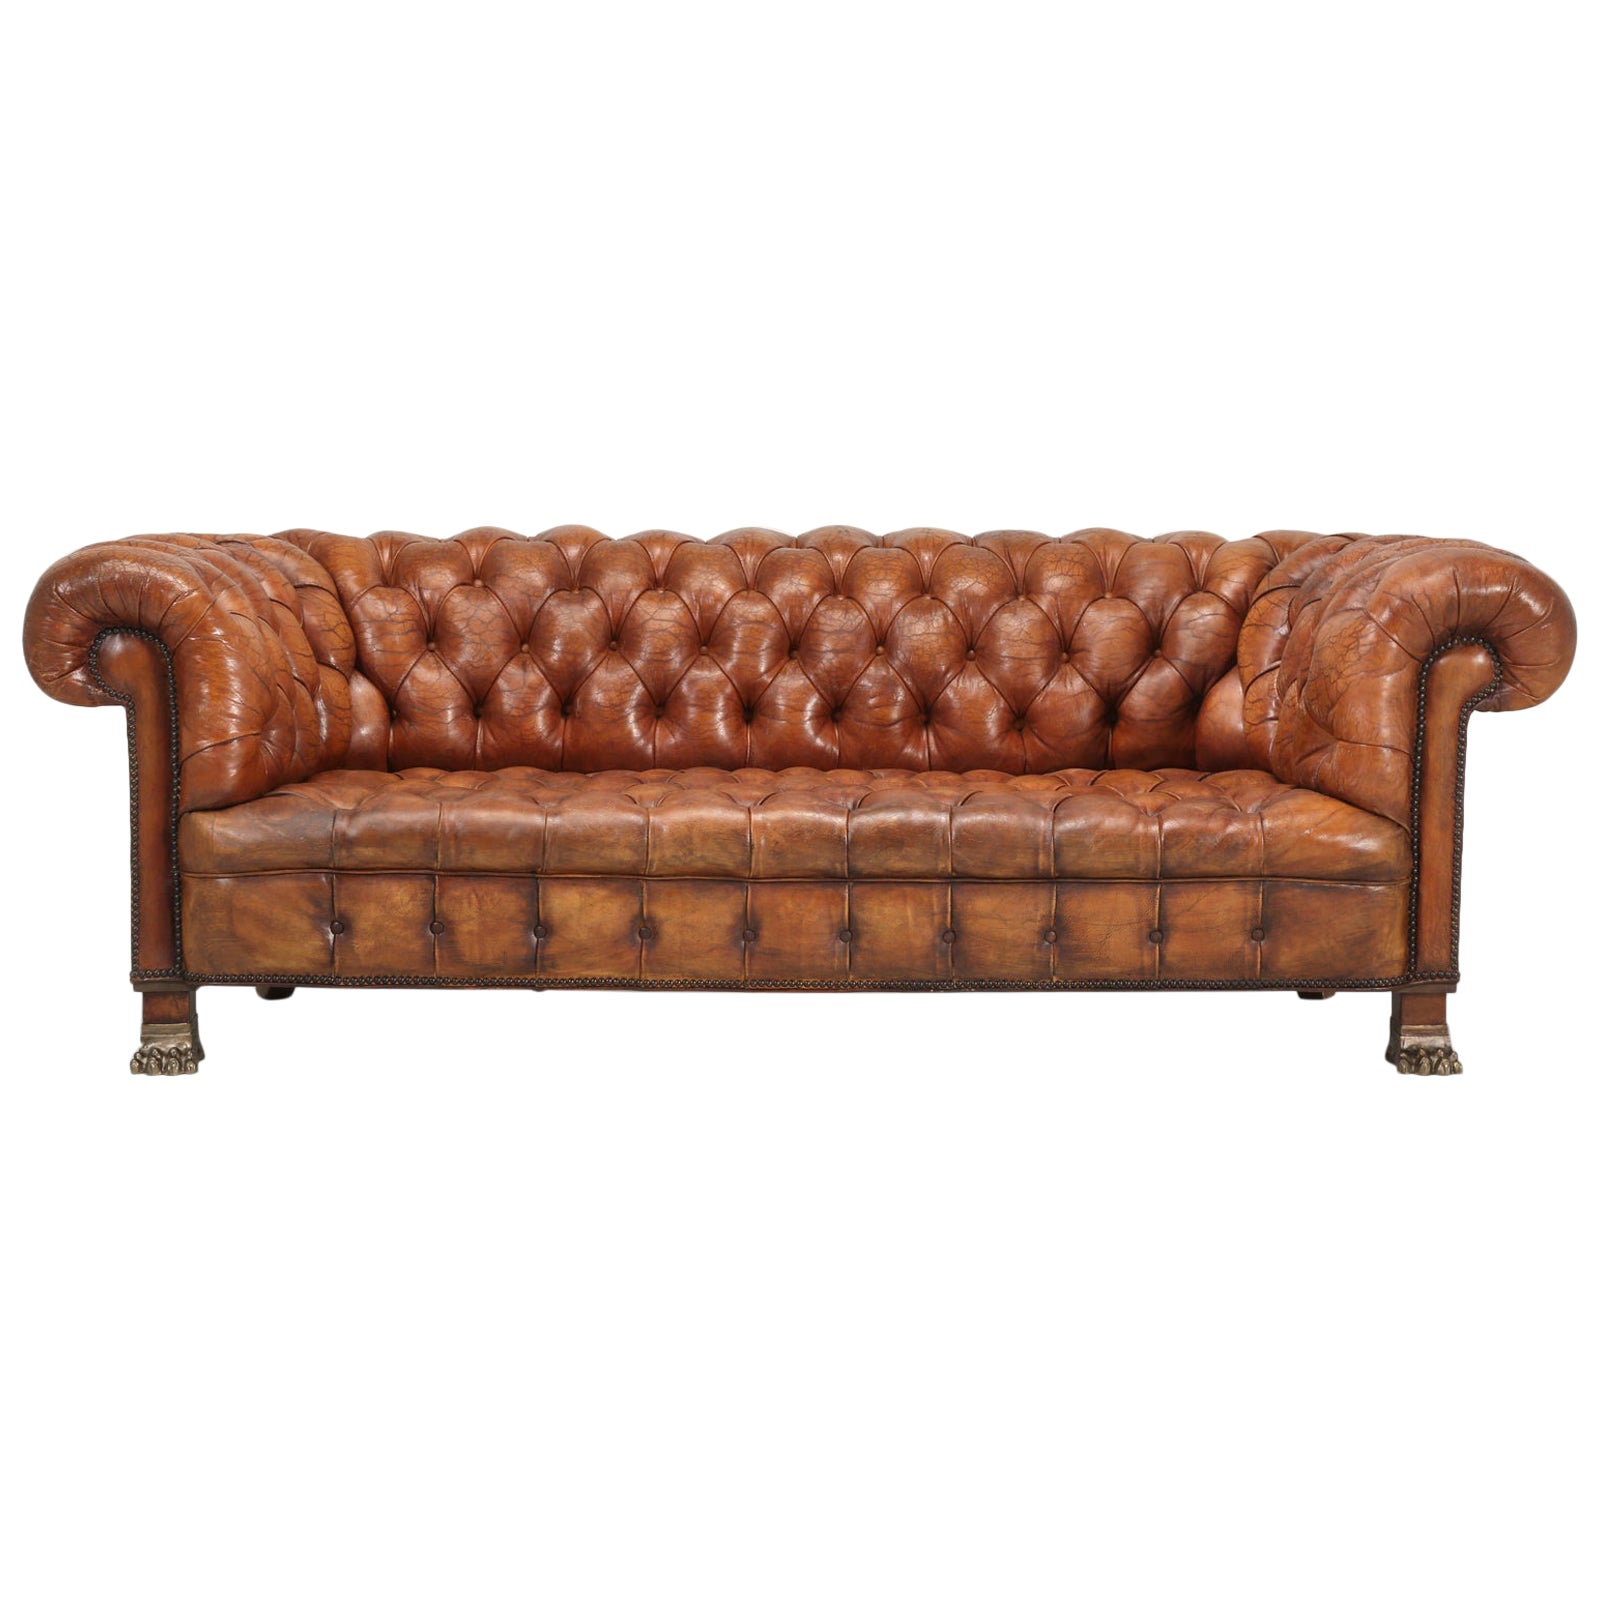 Antique French Leather Chesterfield, Chesterfield Sofa Feet